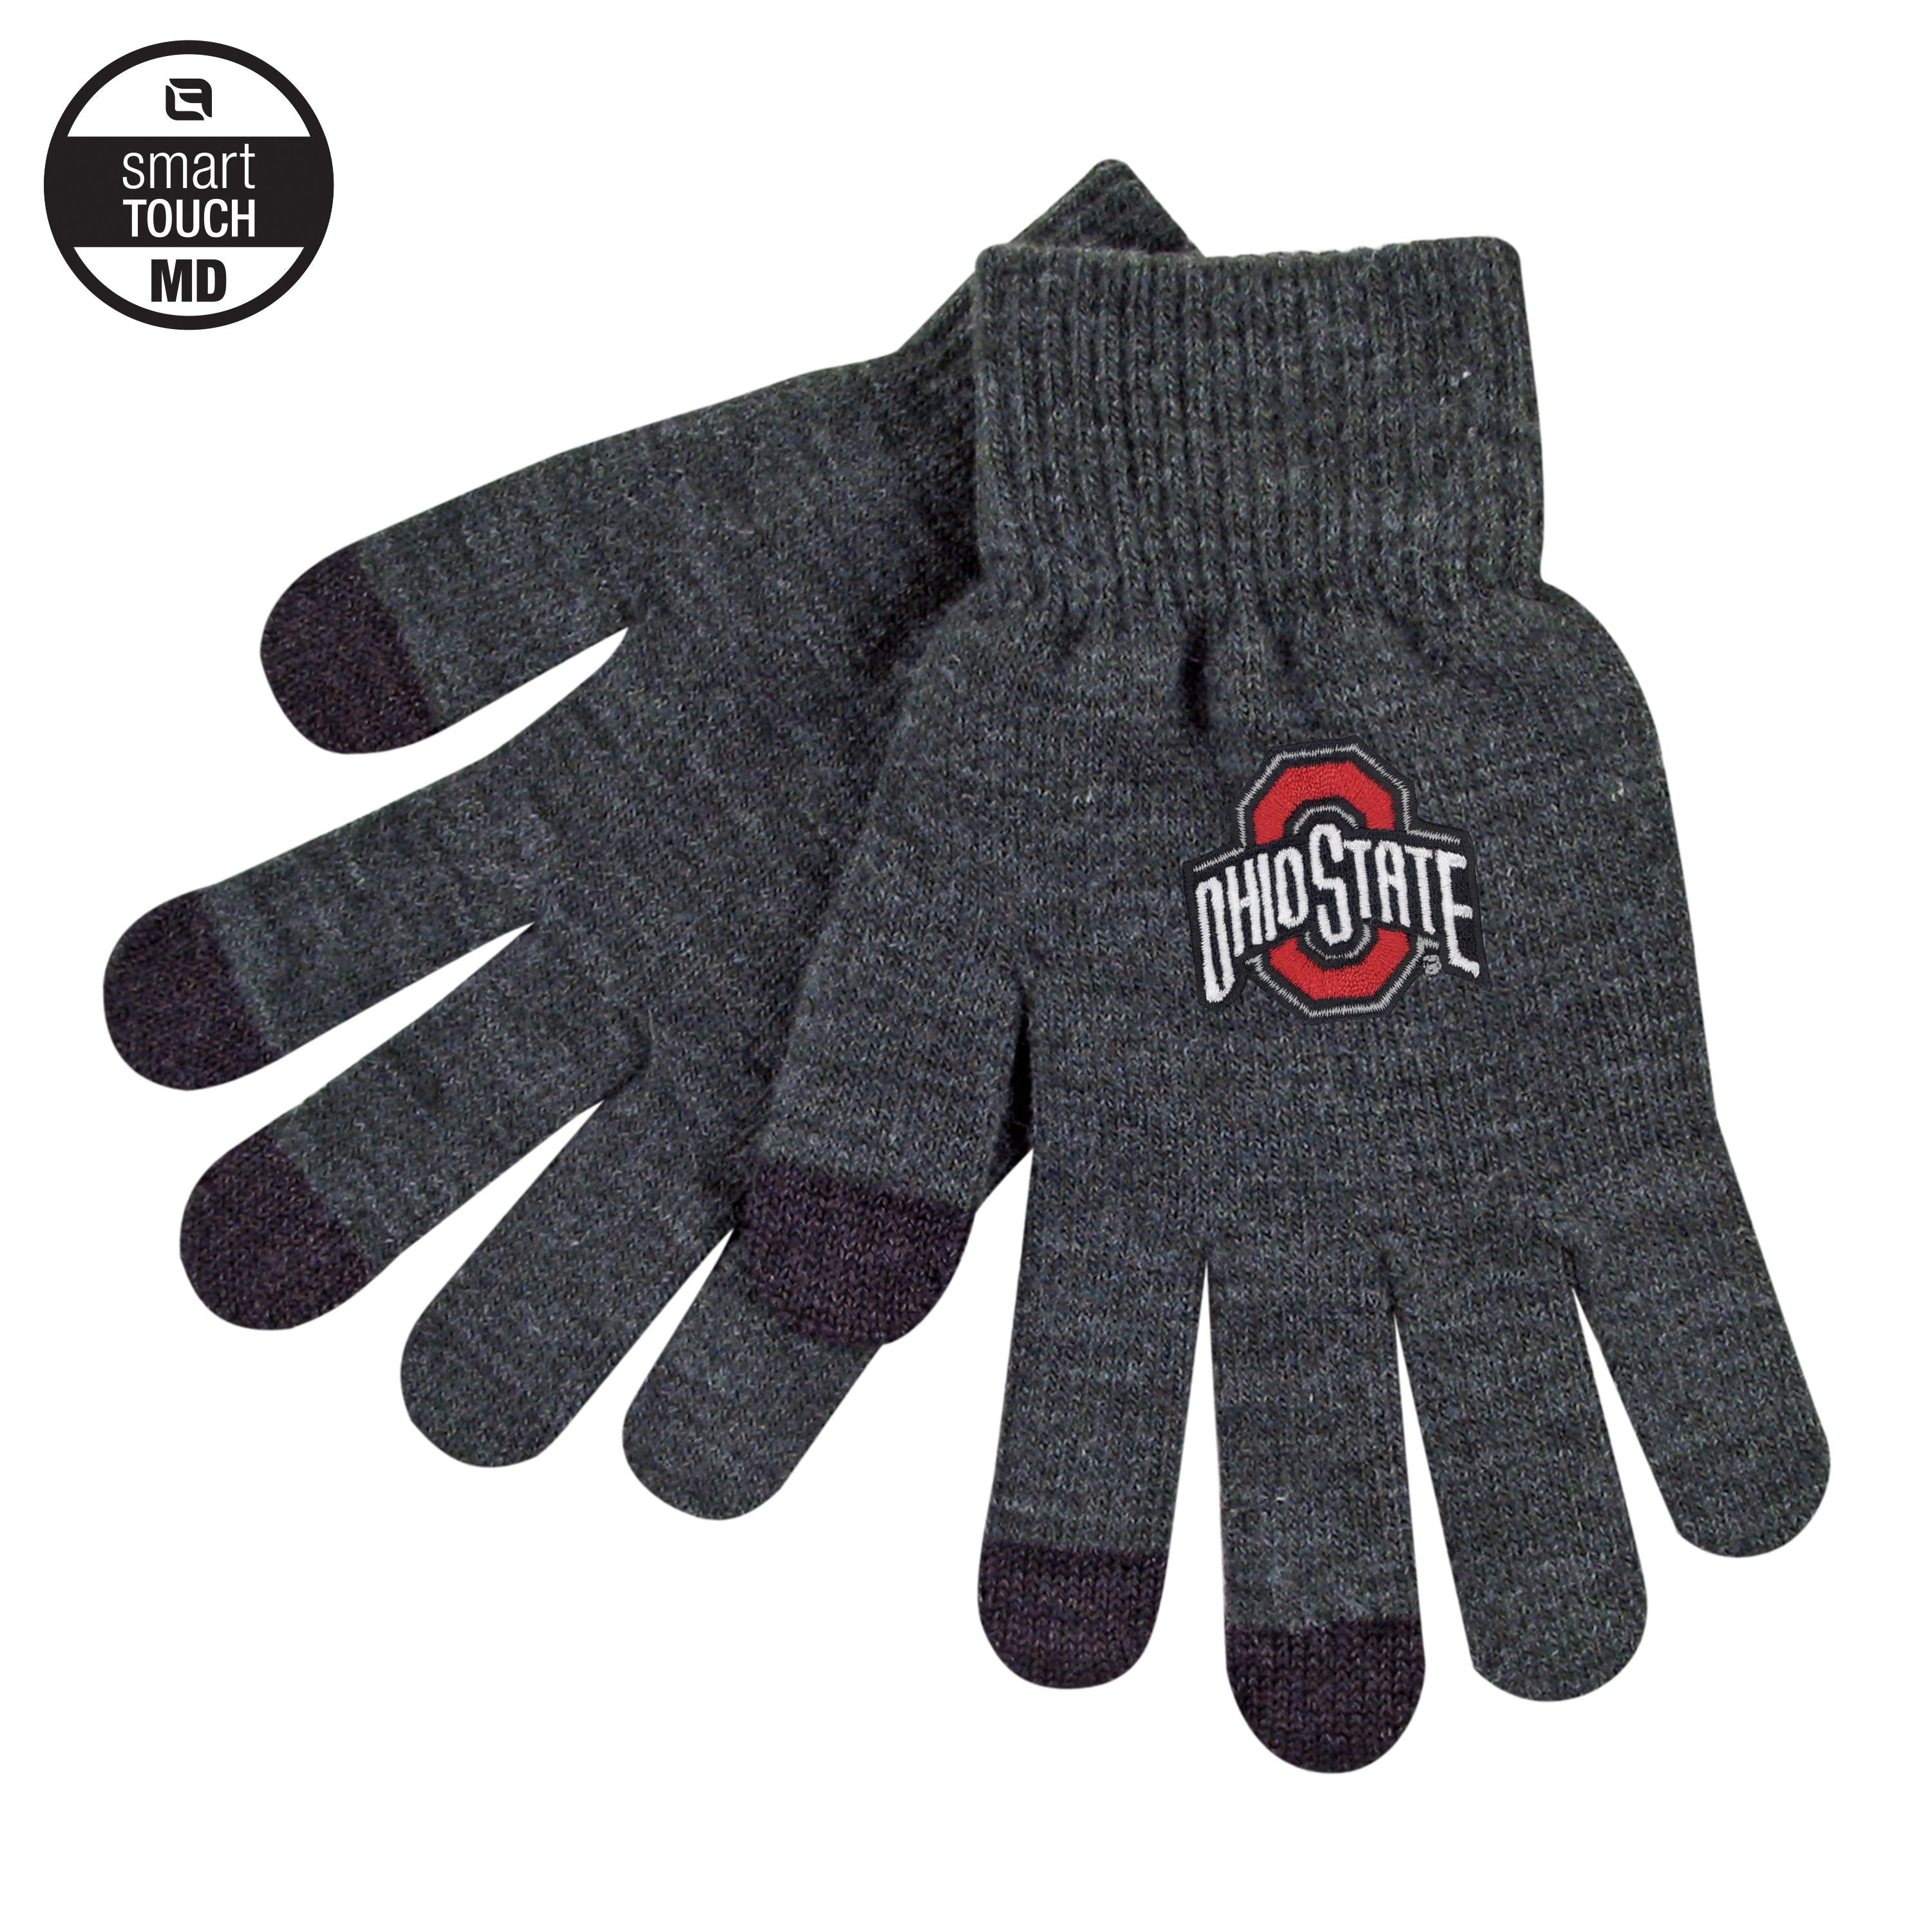 OHIO STATE ITEXT’ KNIT TEXTING GLOVE BY LOGOFIT